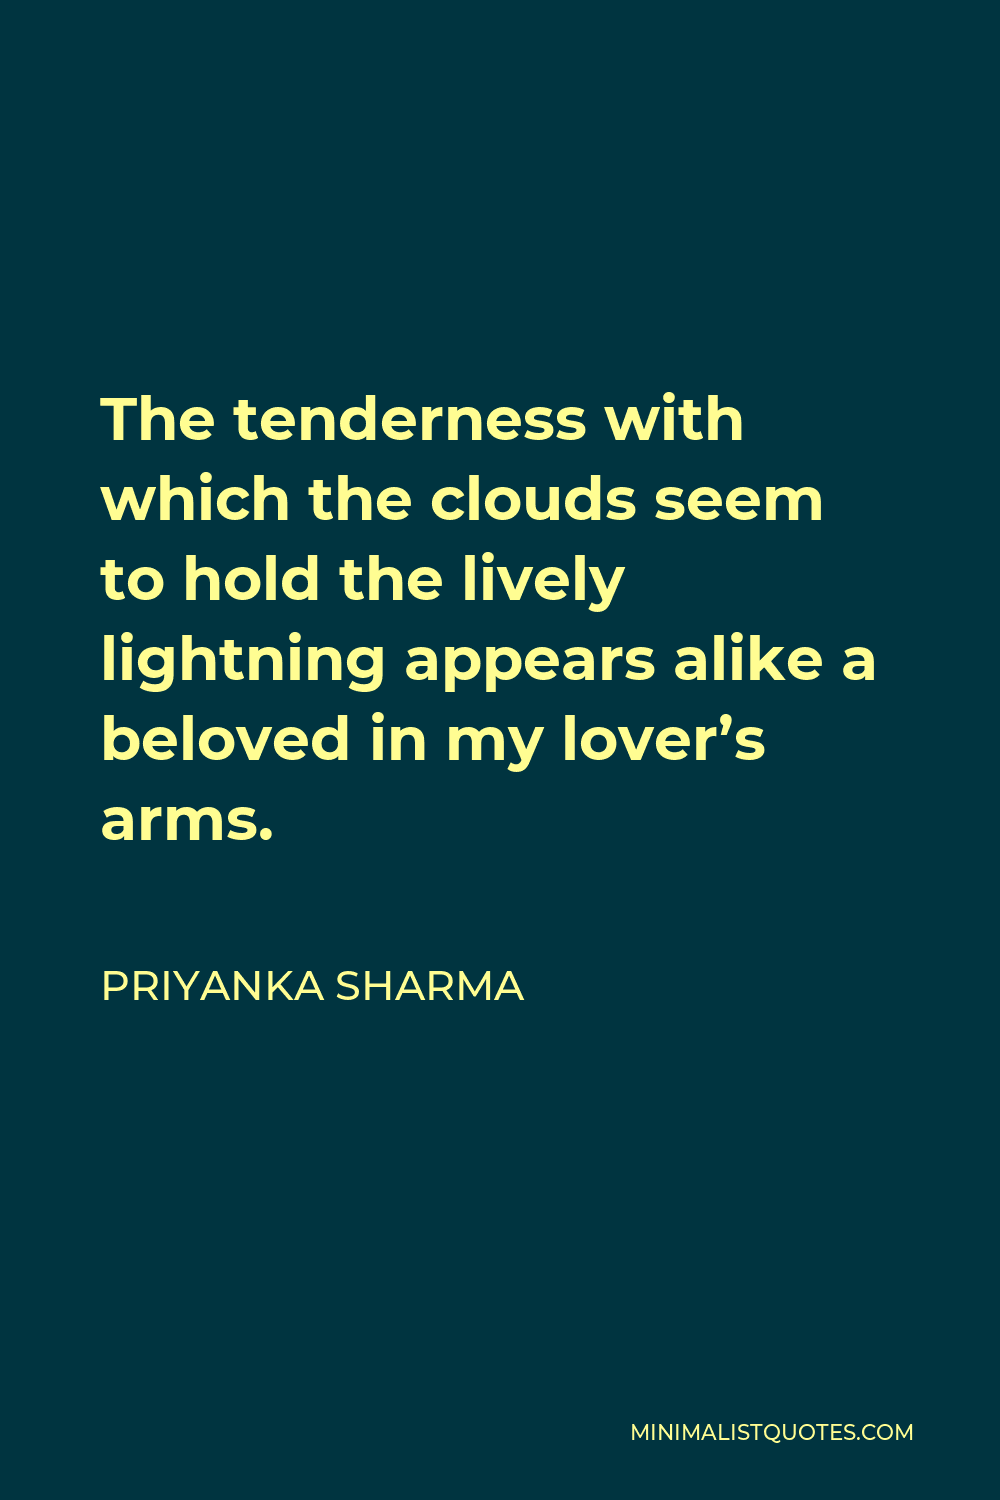 Priyanka Sharma Quote - The tenderness with which the clouds seem to hold the lively lightning appears alike a beloved in my lover’s arms.